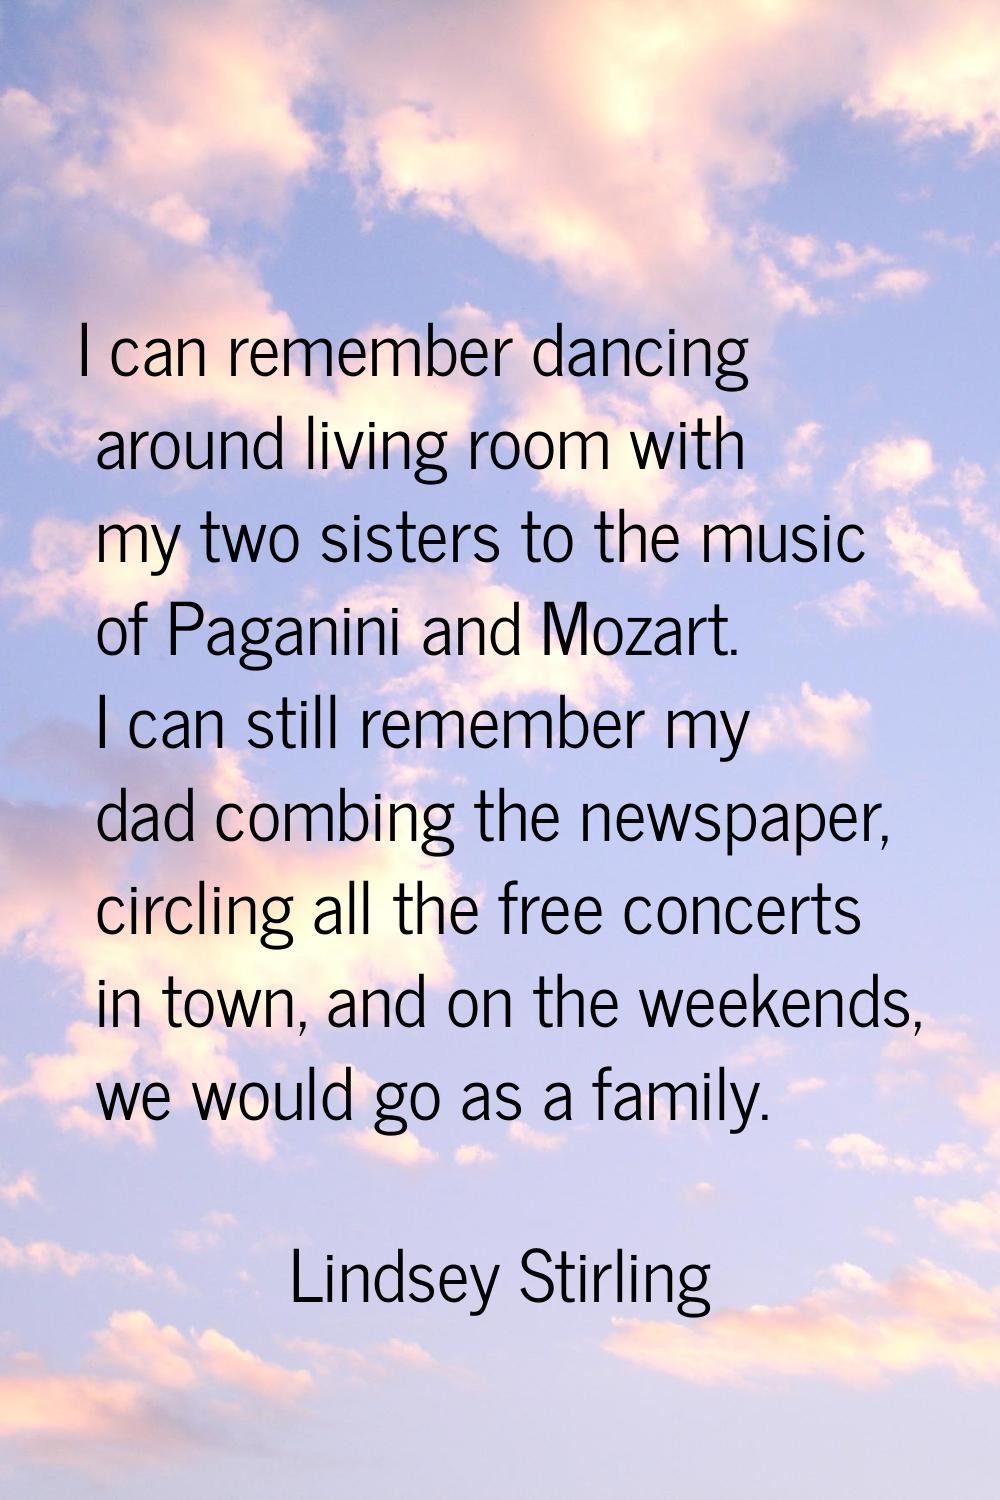 I can remember dancing around living room with my two sisters to the music of Paganini and Mozart. 